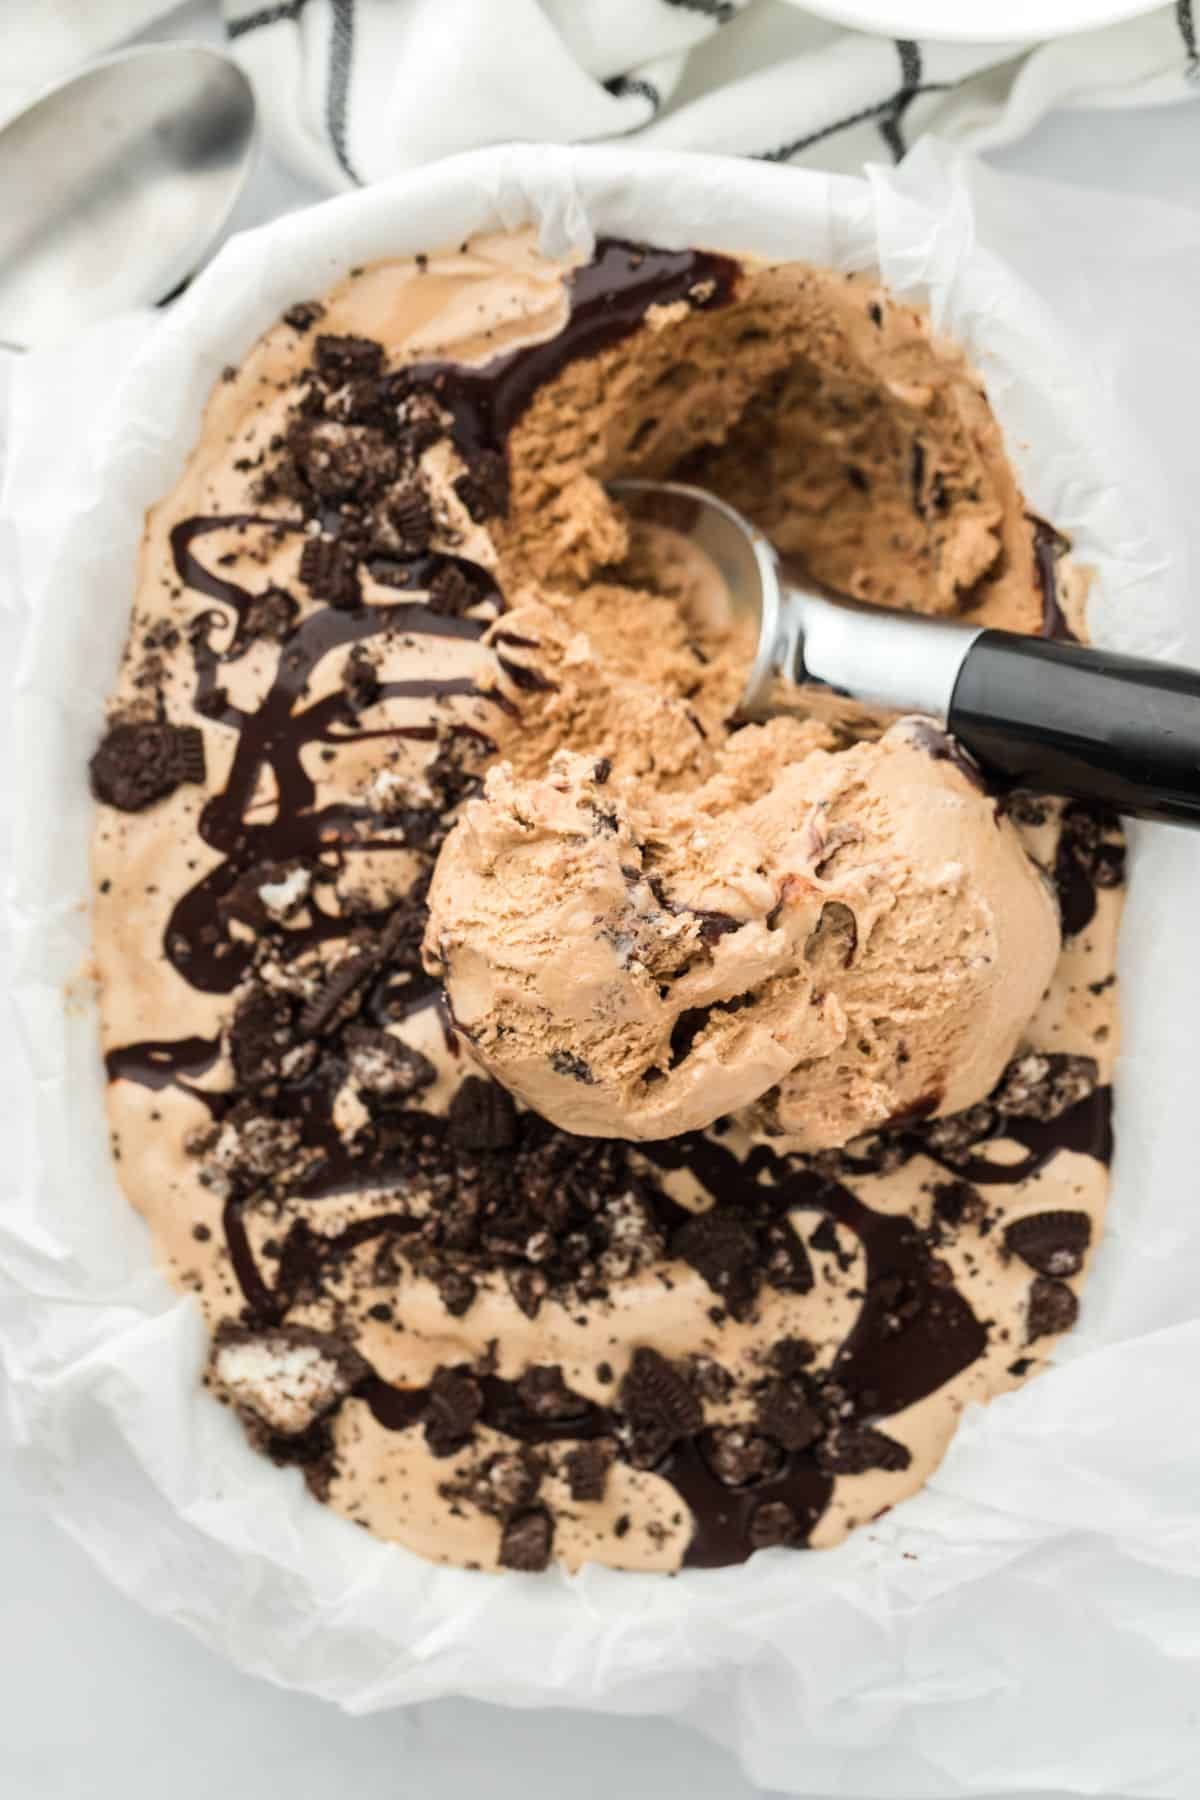 Close up of a tray full of mocha fudge swirl ice cream with a ice cream scoop in it